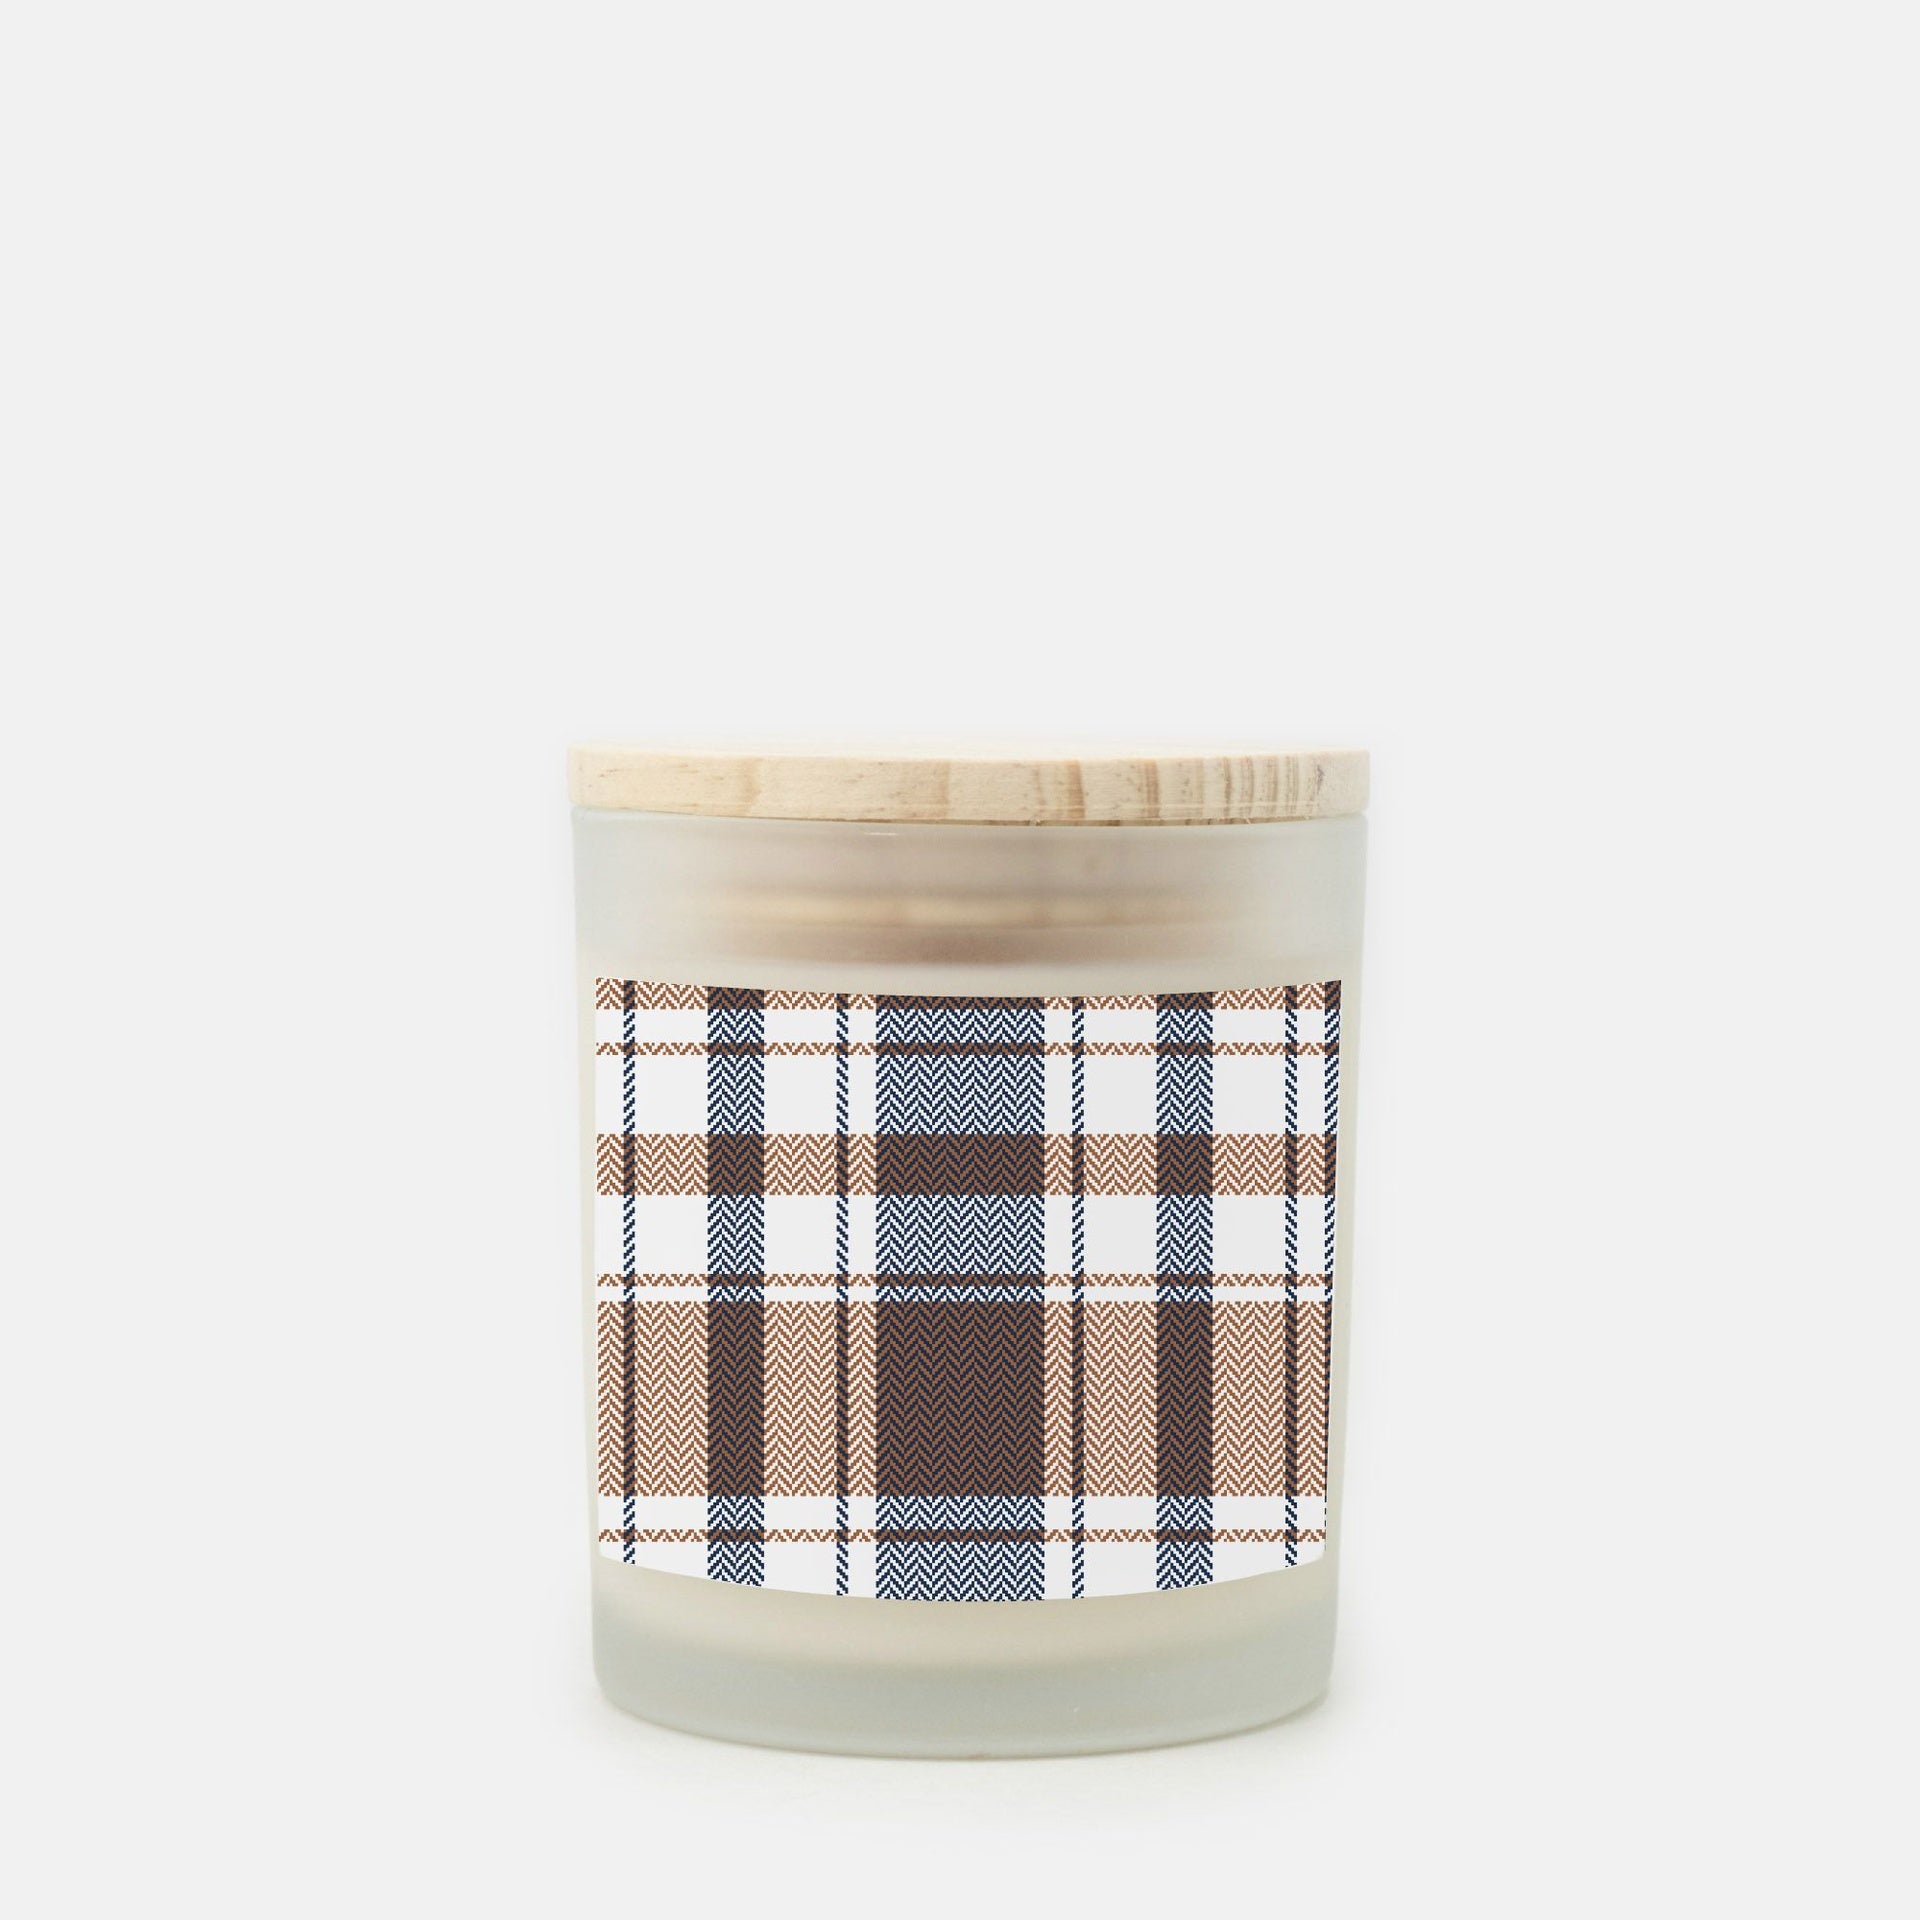 Lifestyle Details - 11oz Brown & Black Plaid Frosted Glass Candle - Cashmere Vanilla